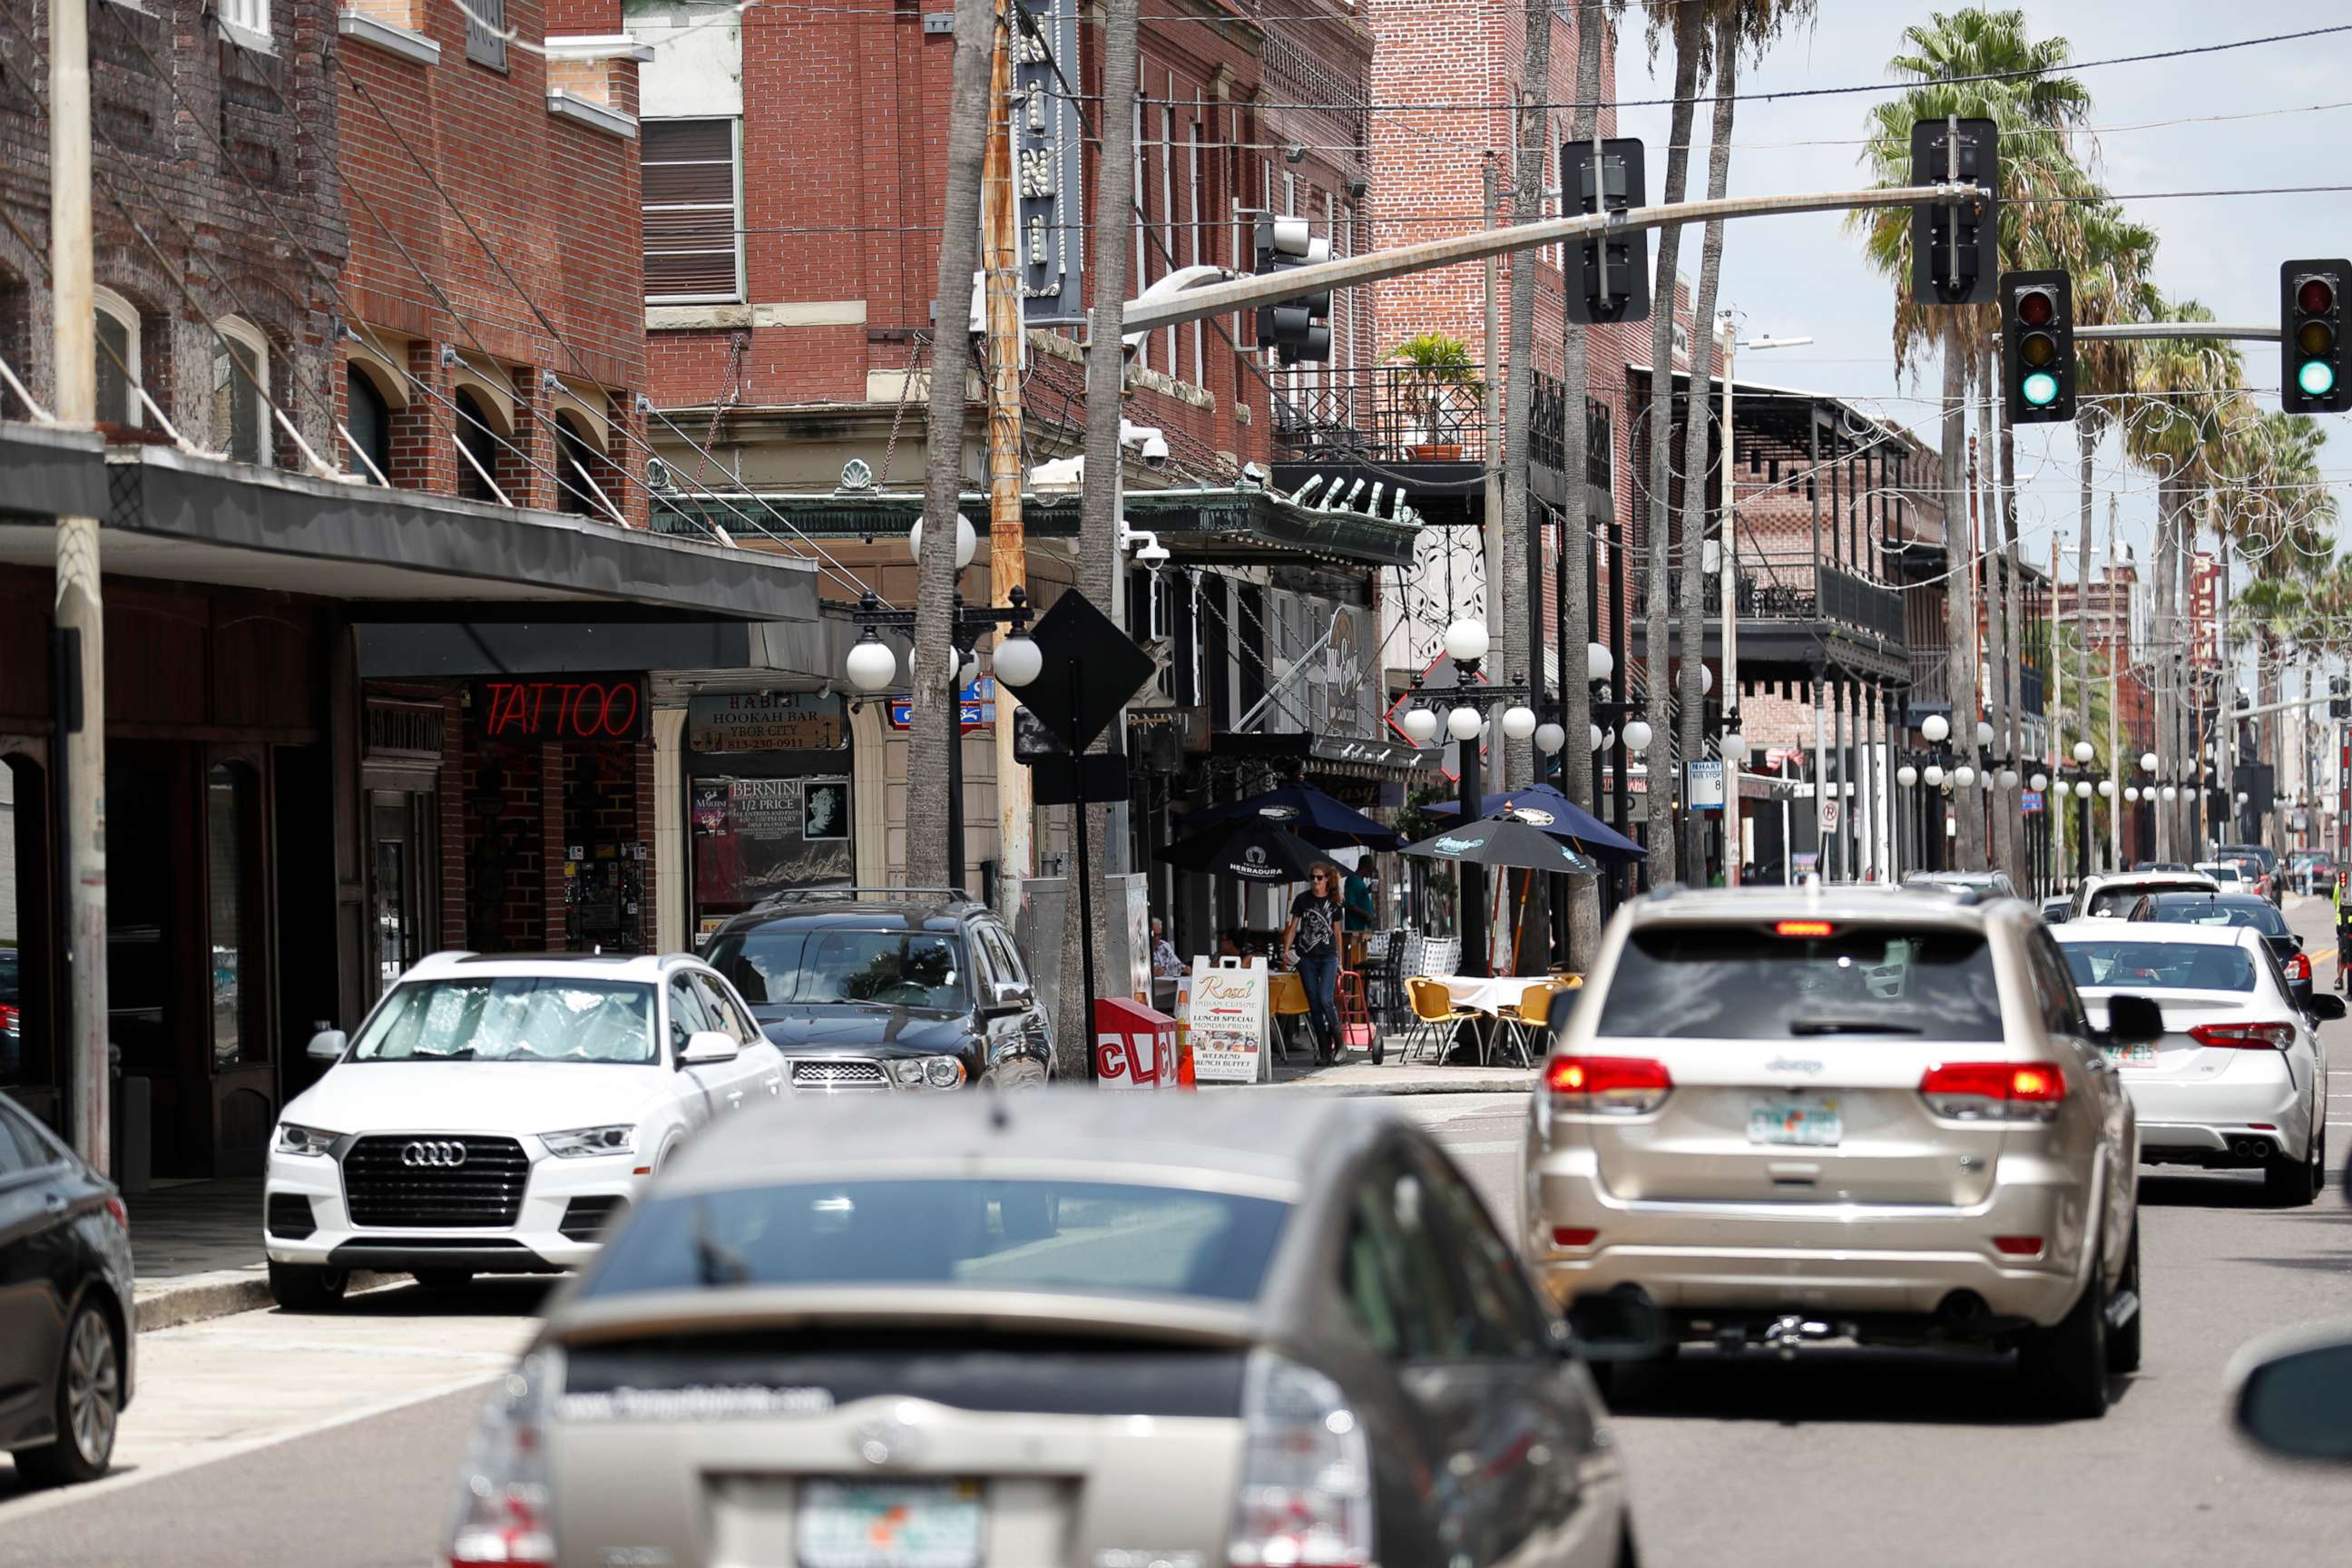 PHOTO: In this June 26, 2020, file photo, cars are seen driving on 7th Avenue in the Ybor City neighborhood of Tampa, Fla.